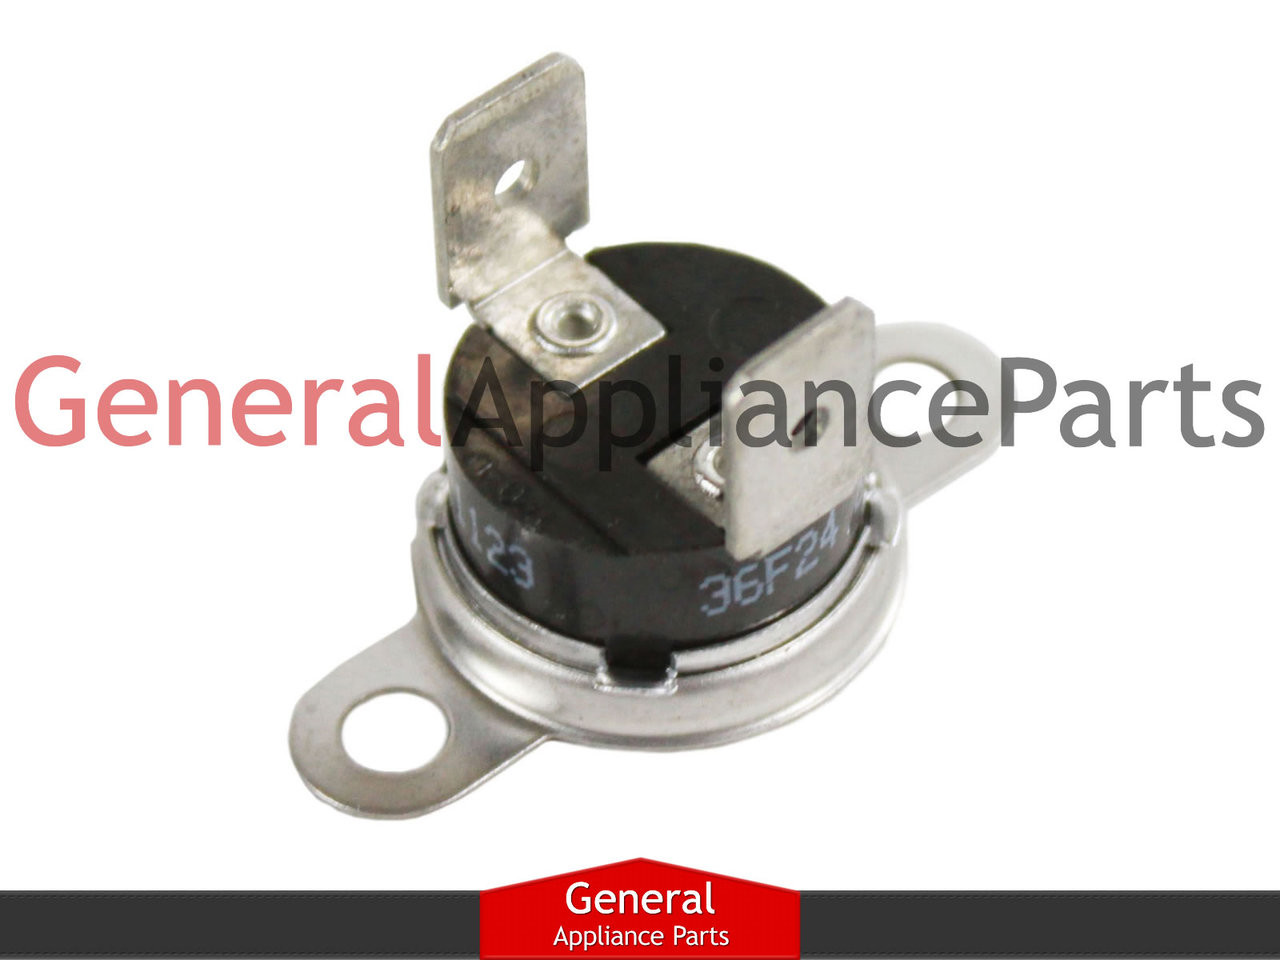 134120900 Electrolux Dryer Thermal Limit Thermostat AP2108182 PS419402 